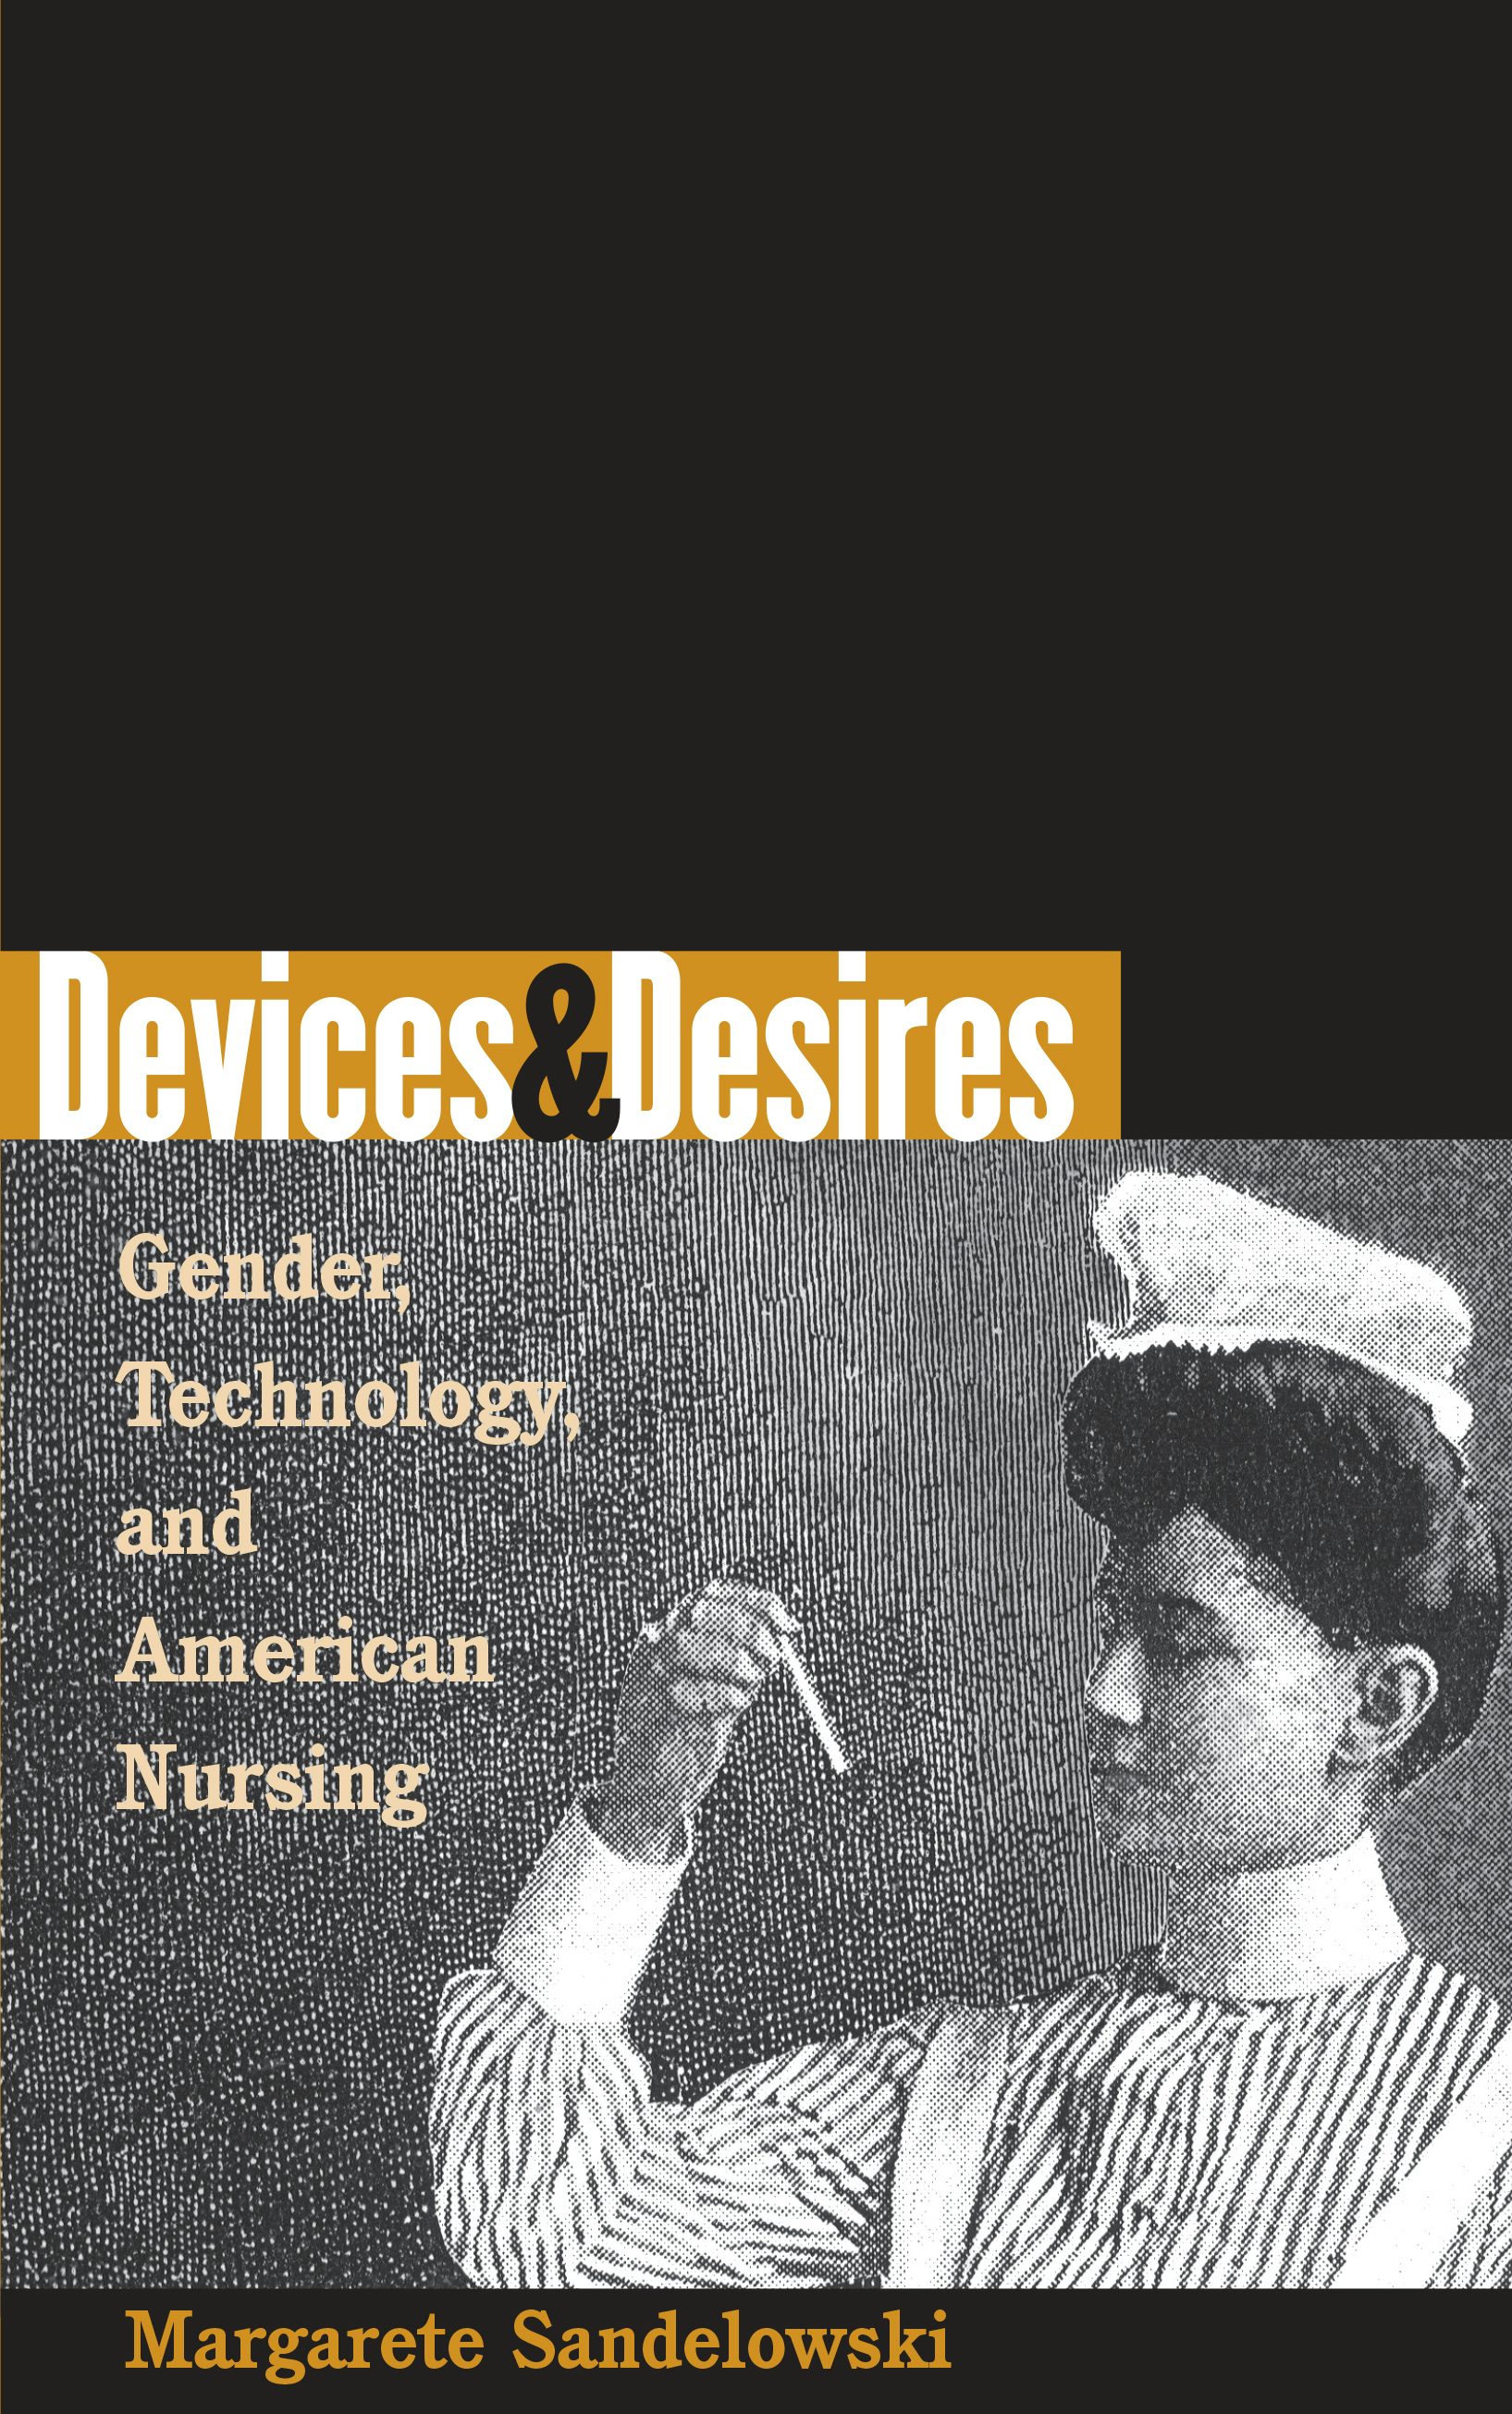 Devices and Desires by P.D. James